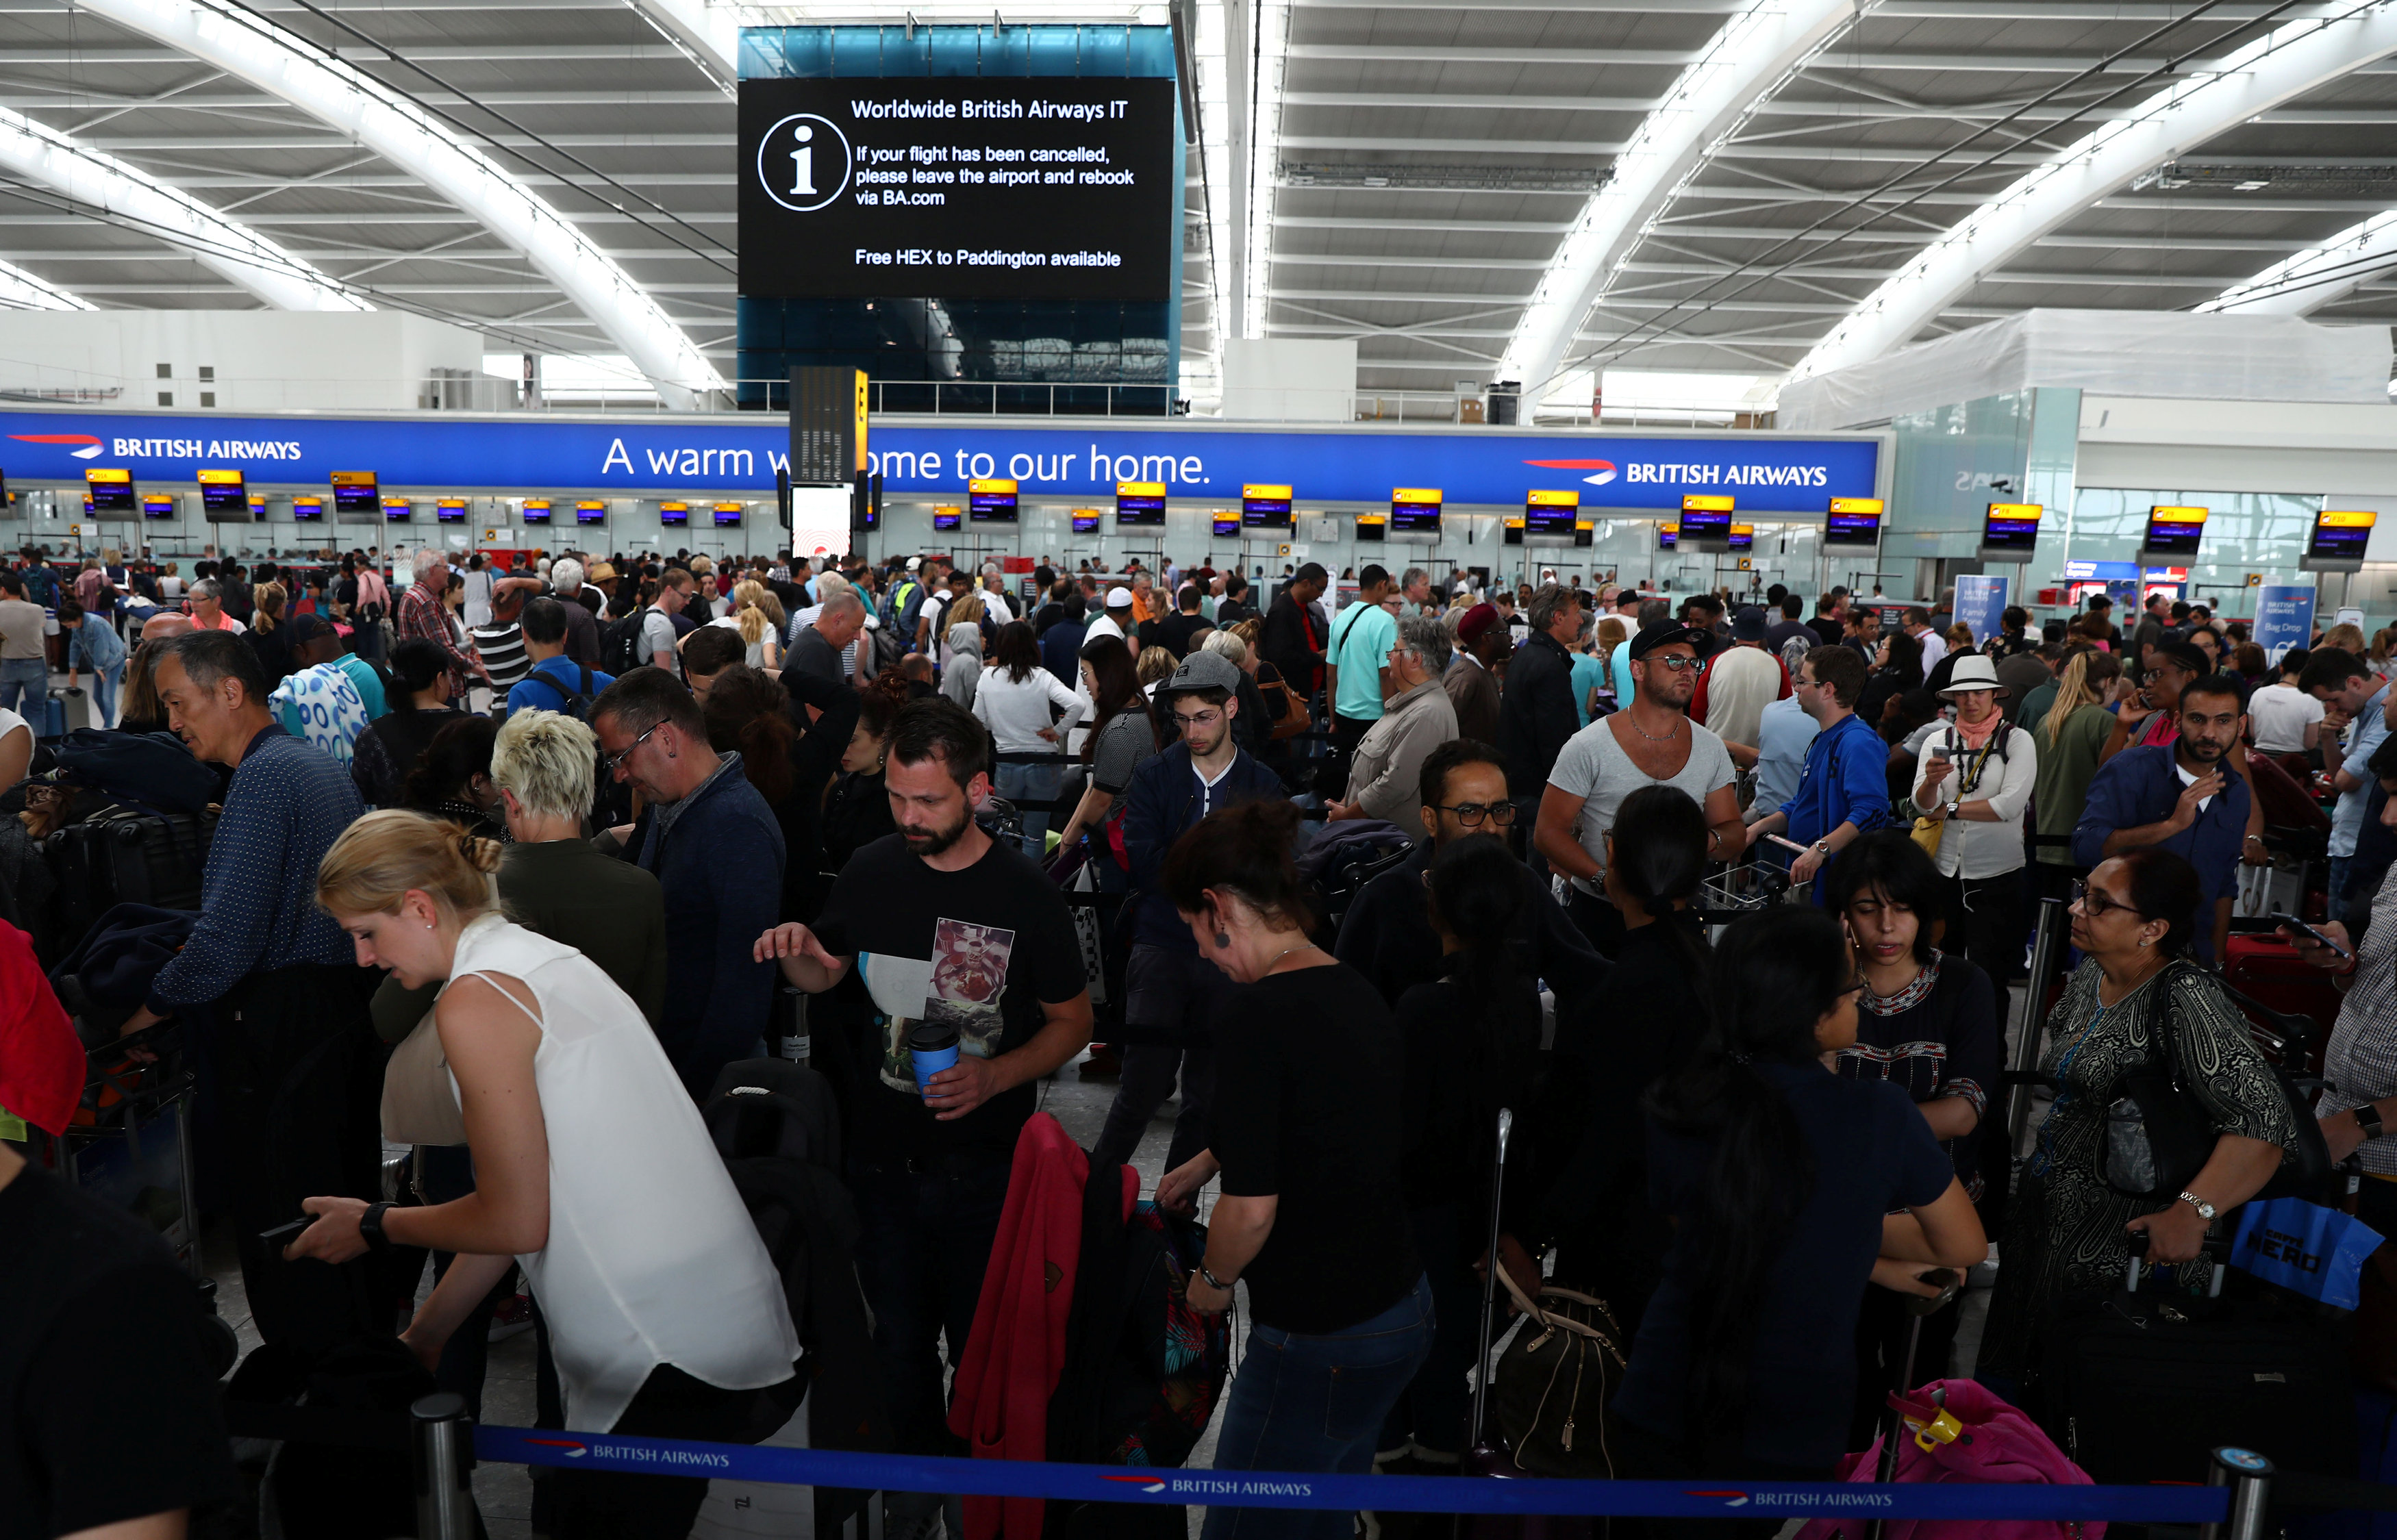 British Airways IT systems running again after weekend outage